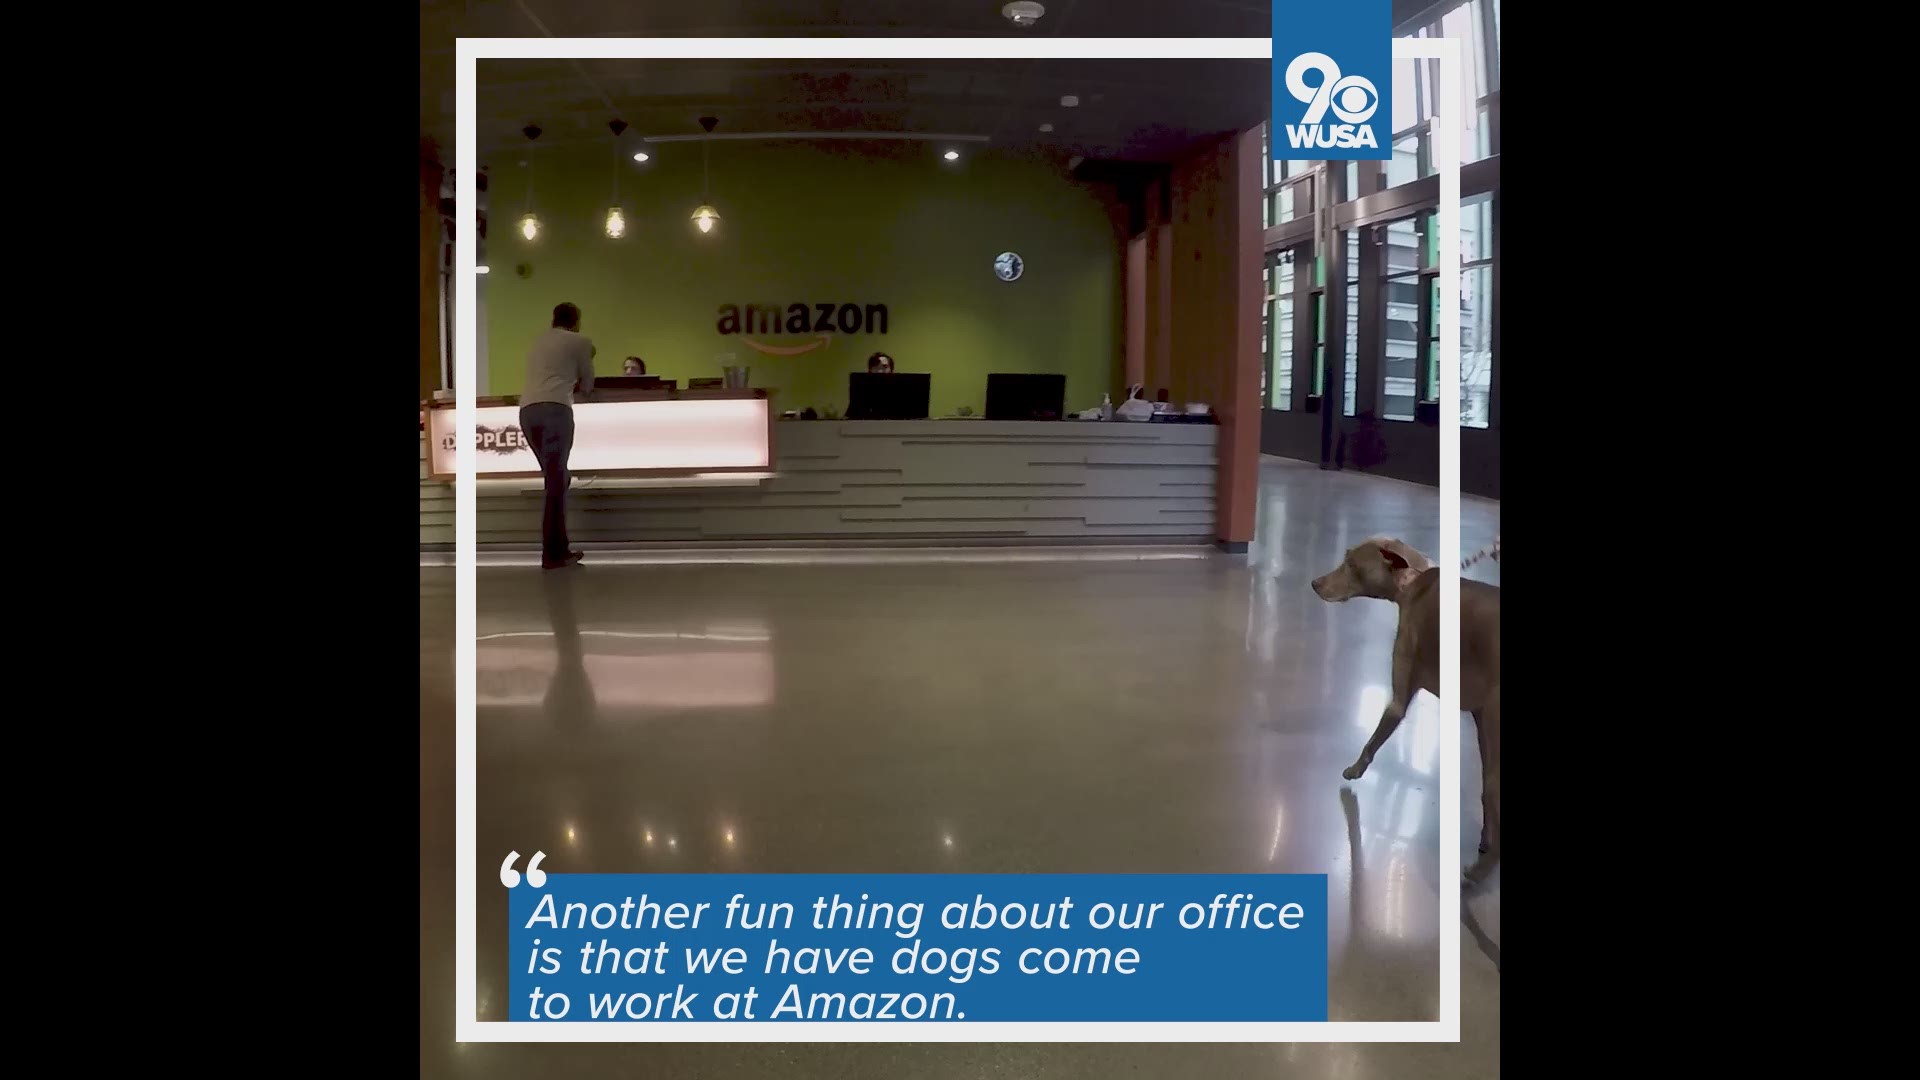 6,000 dogs registered come to work with their owners at the company's Seattle headquarters.